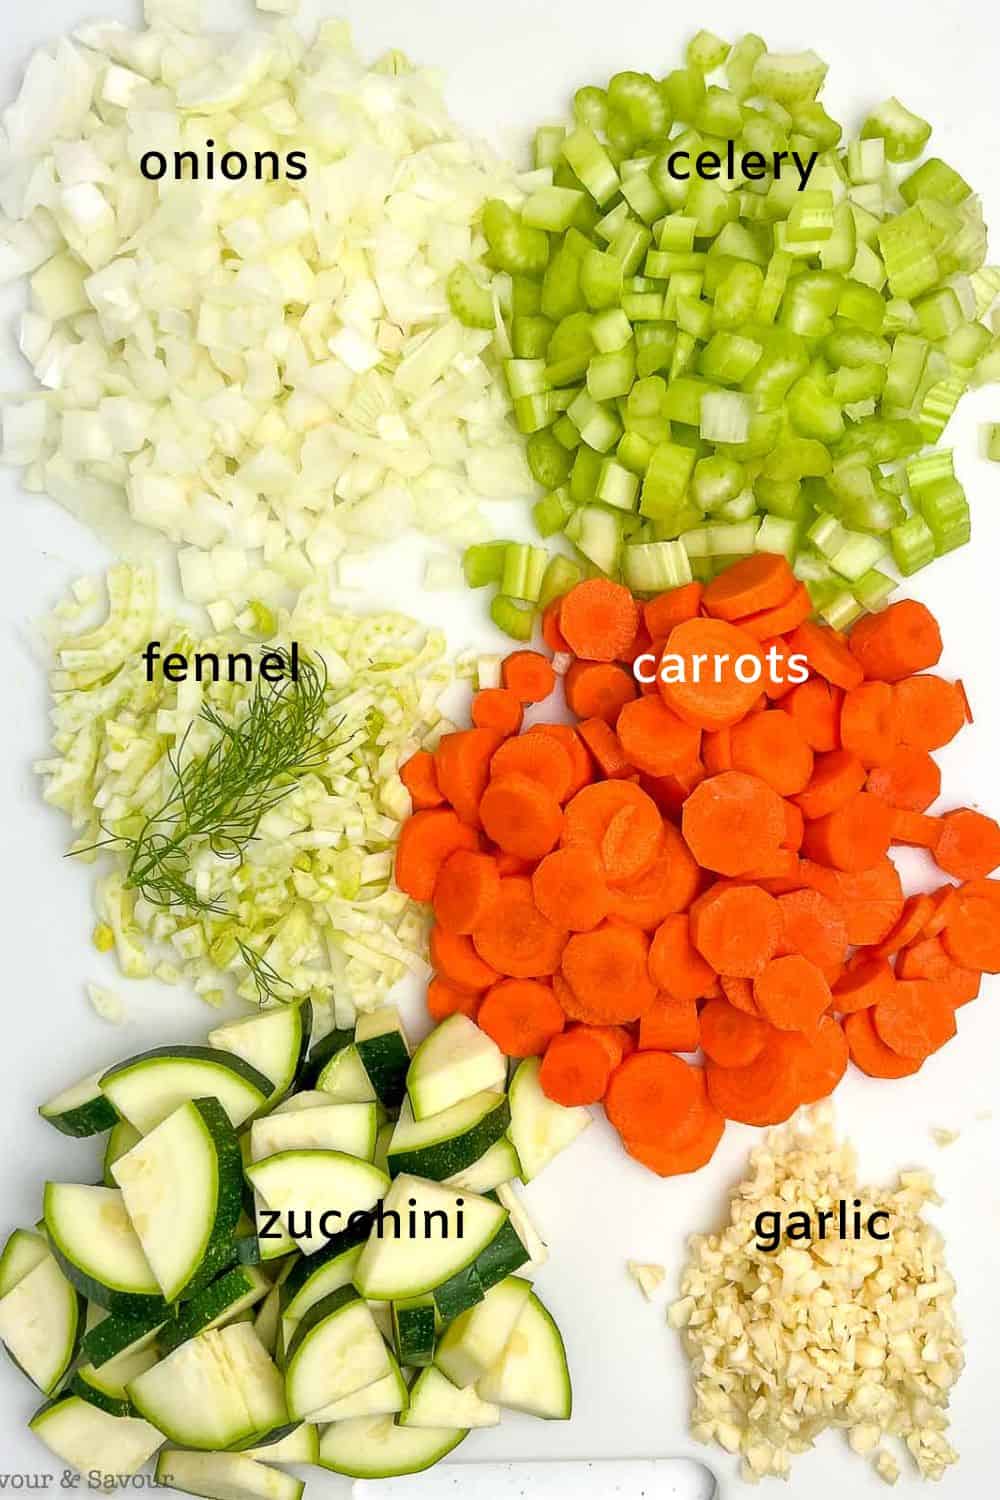 Chopped vegetables for Italian Gnocchi Soup.